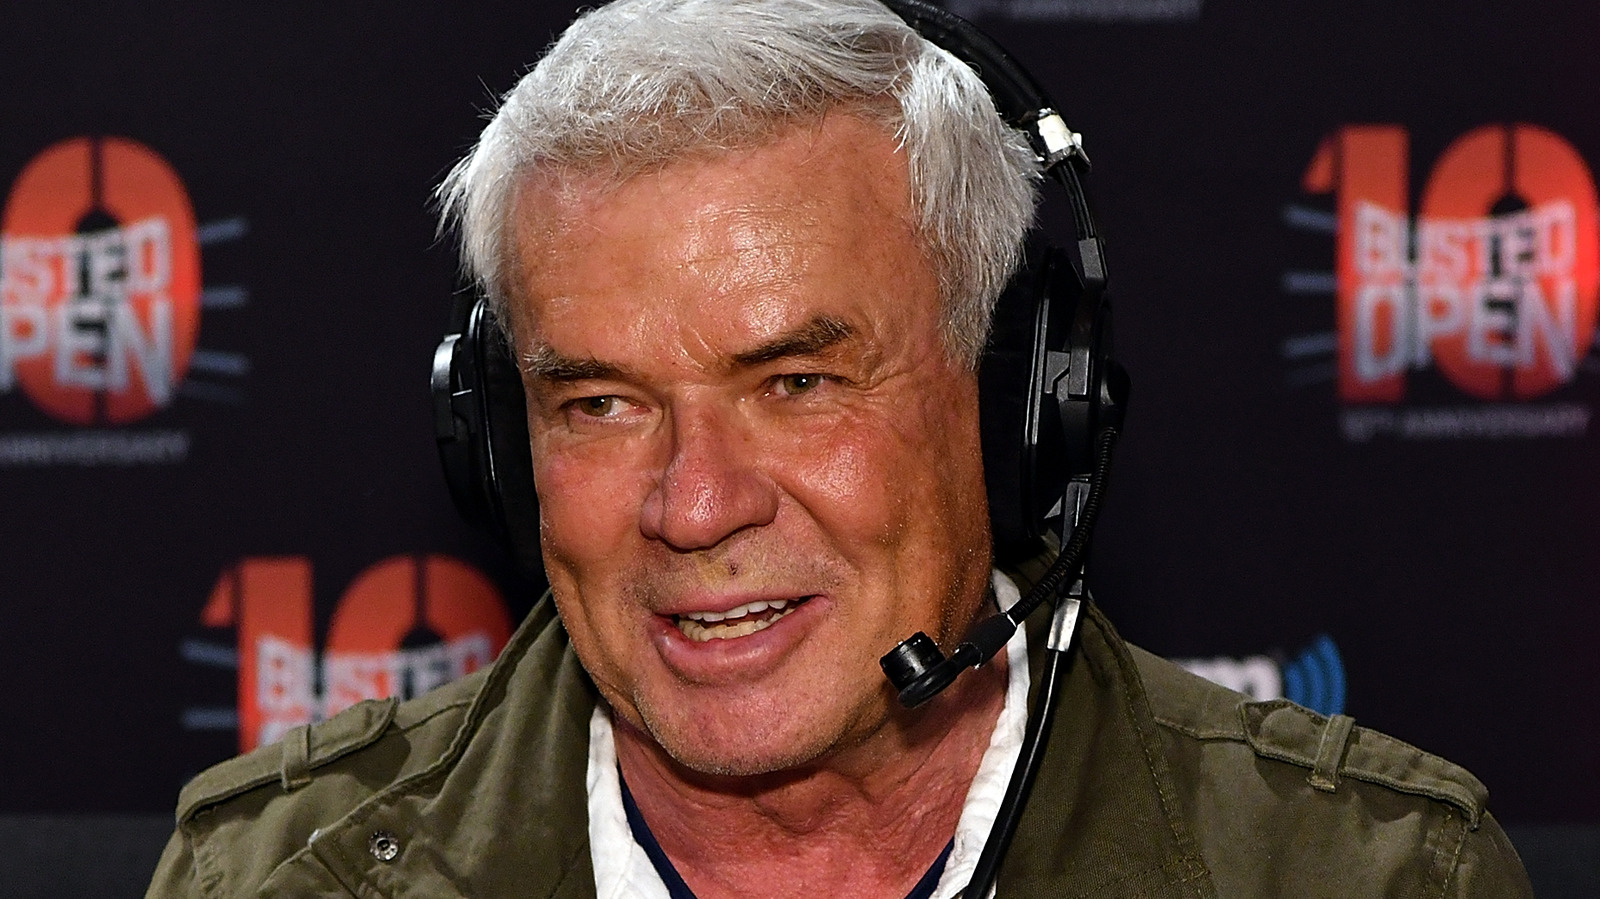 Eric Bischoff Calls CM Punk Desperate, Overrated, 'Looks Like The Guy Who Changes My Oil At Jiffy Lube'